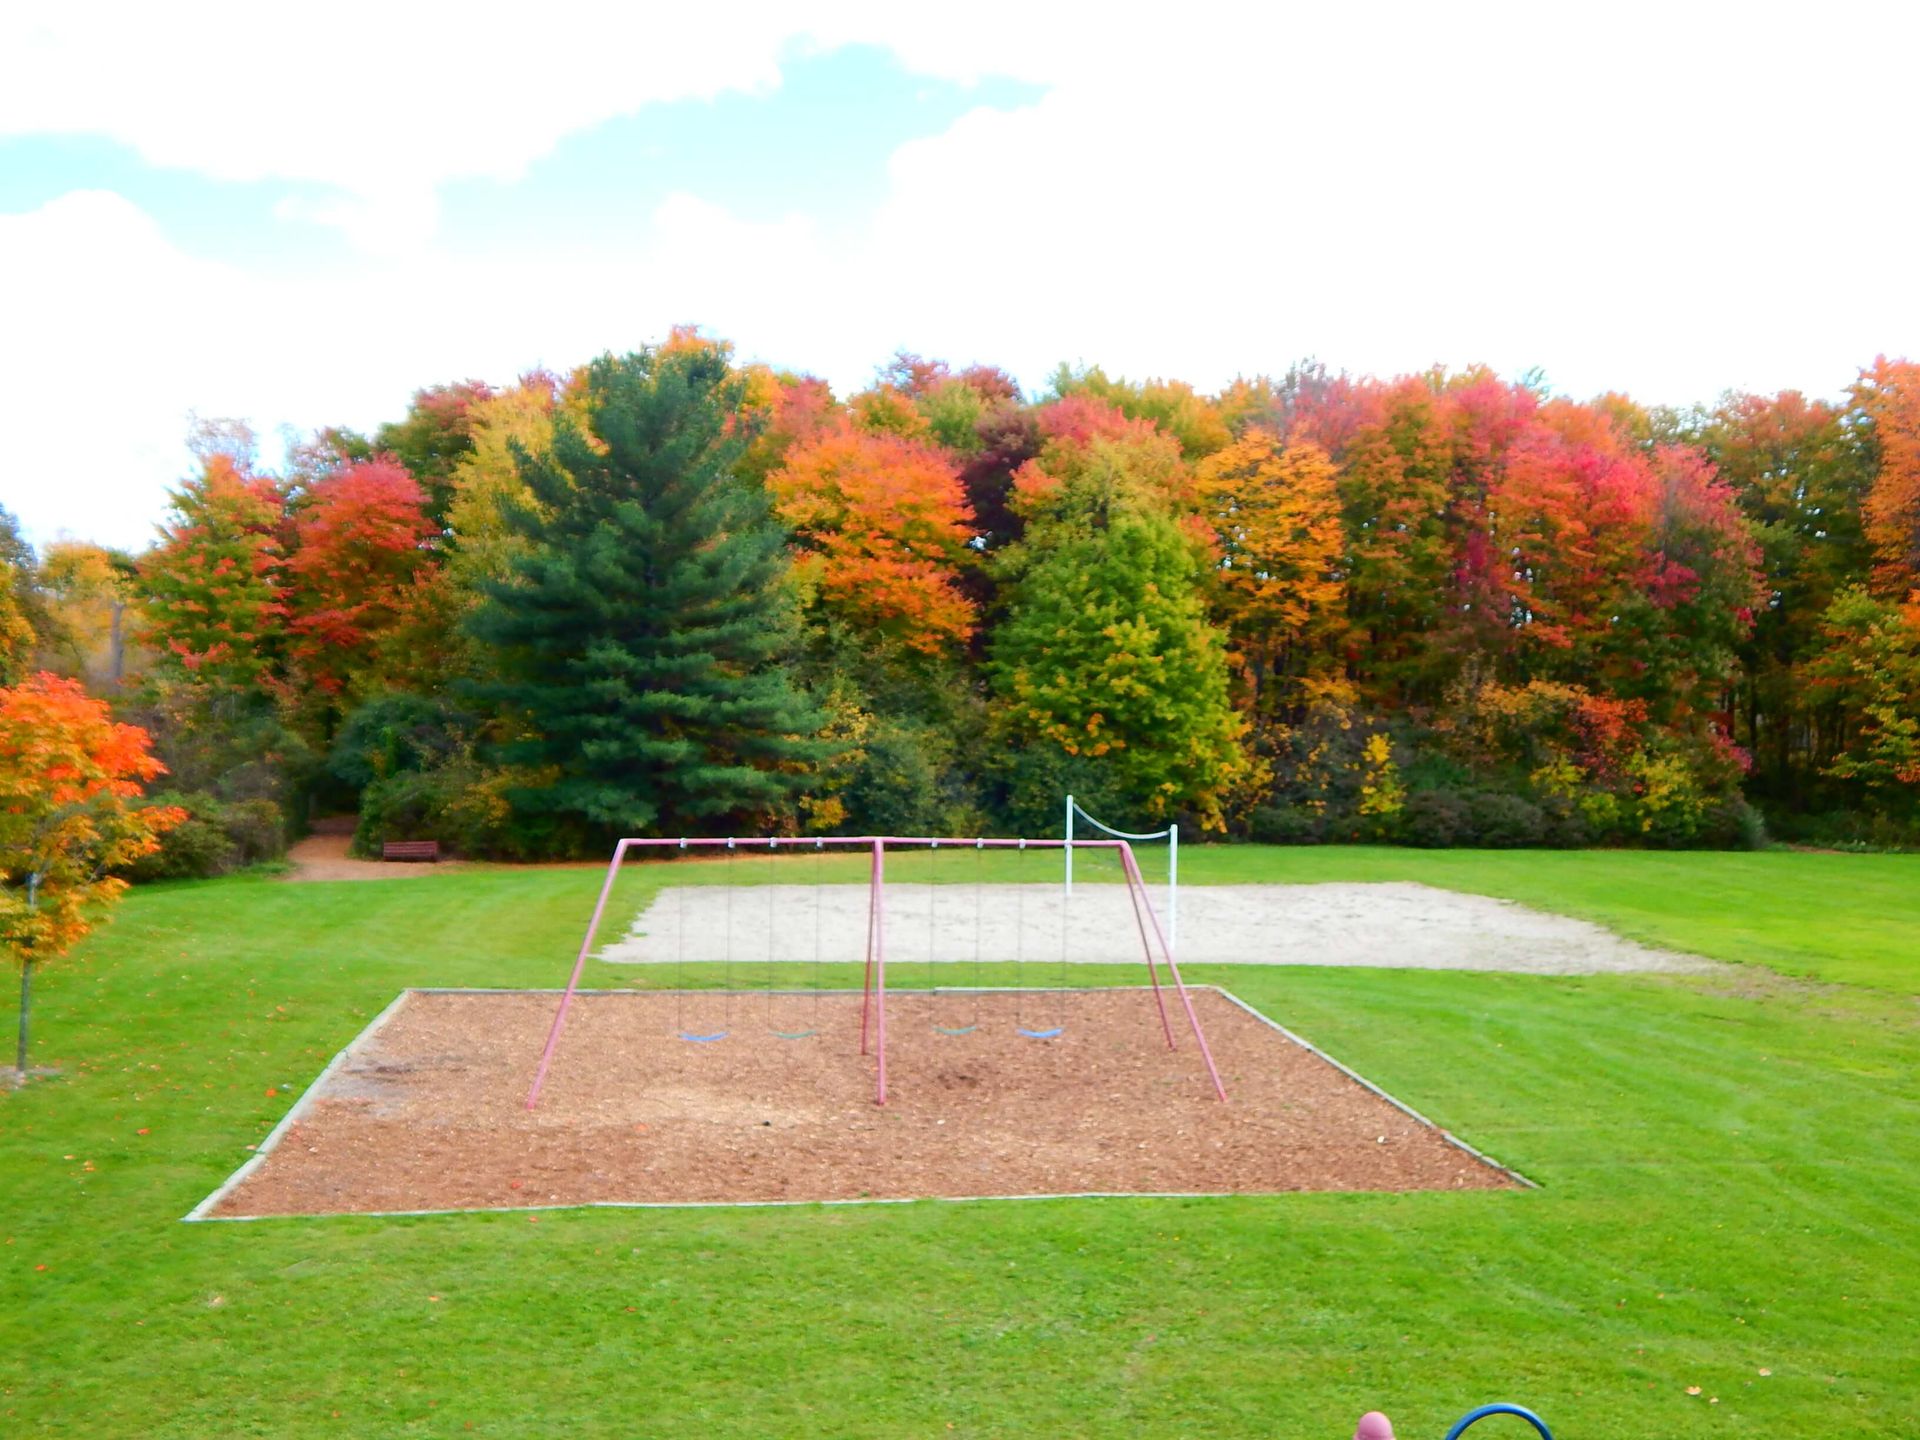 A volleyball court in a park with trees in the background.